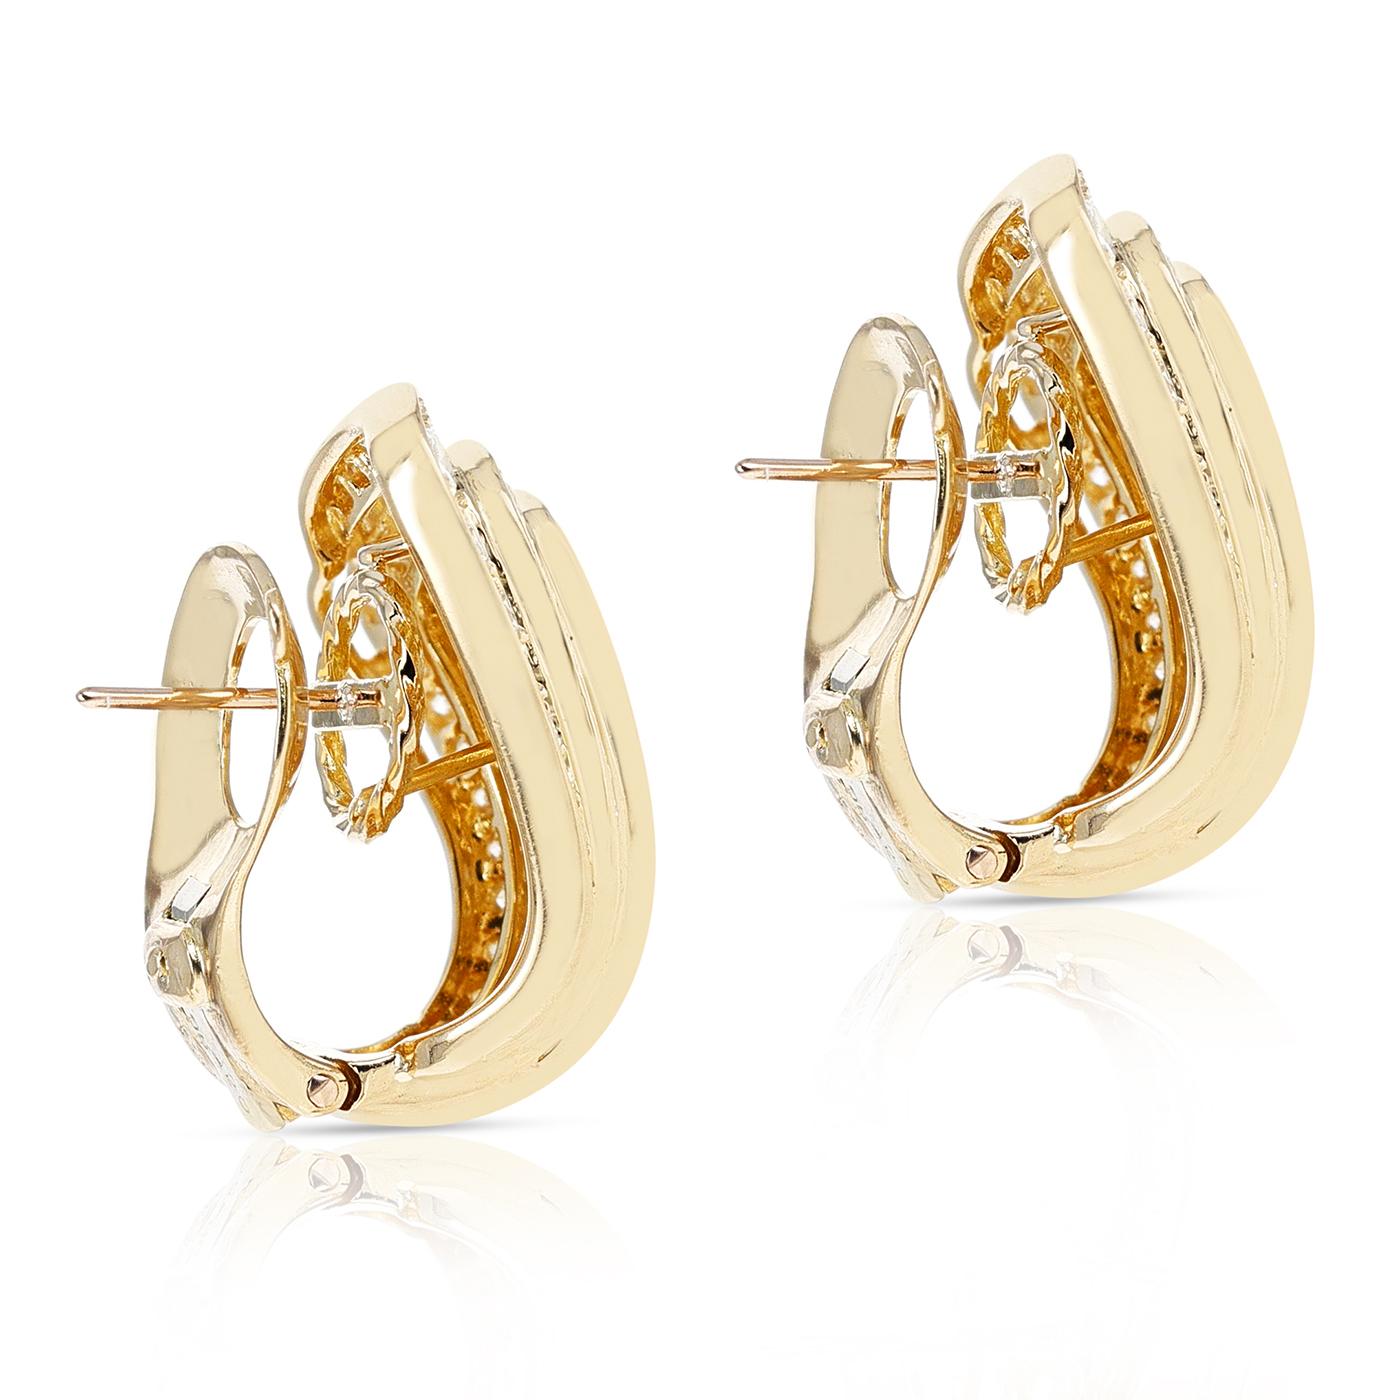 A pair of Van Cleef & Arpels Three-Step Cocktail Earrings with 3.20 carats of Diamonds made in 18 Karat Yellow Gold. The total weight is 12.96 grams. The length is 0.90 inches. 